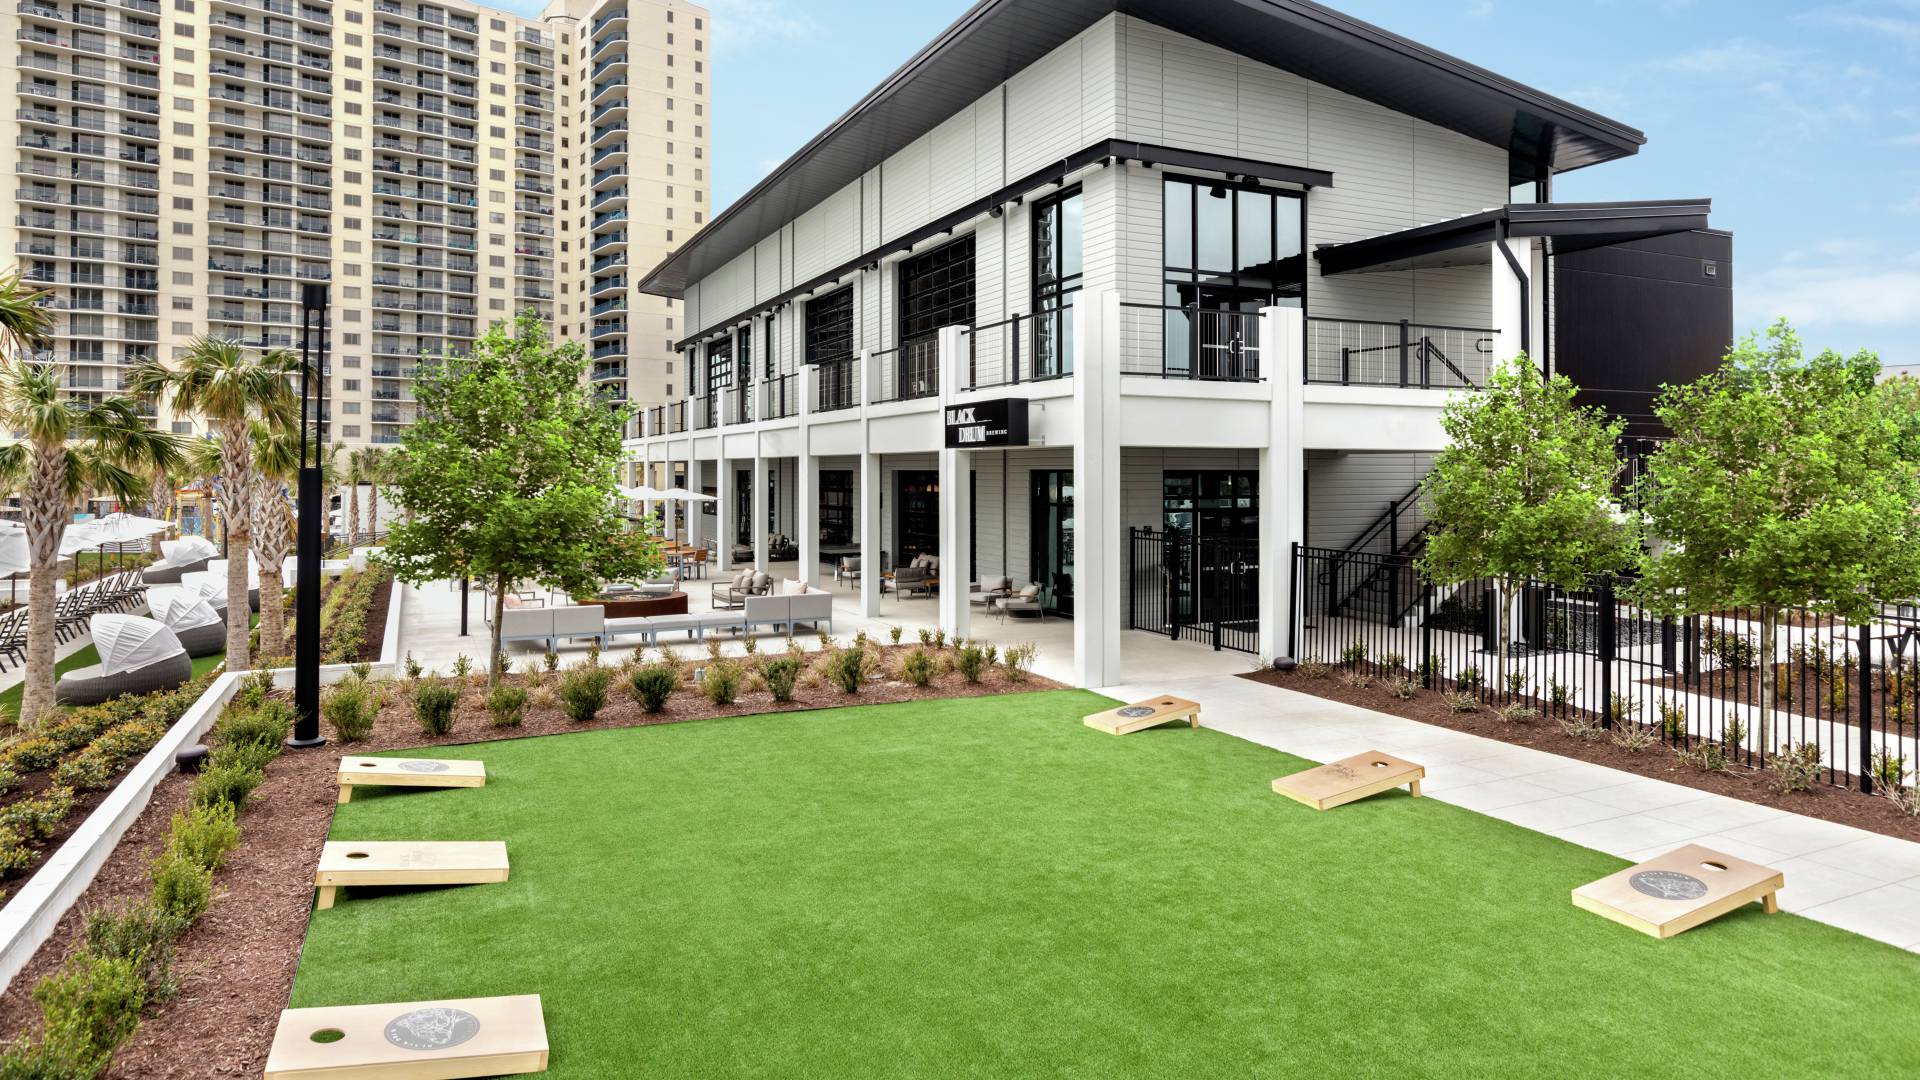 On-site brewery and restaurant featuring outdoor lawn game area